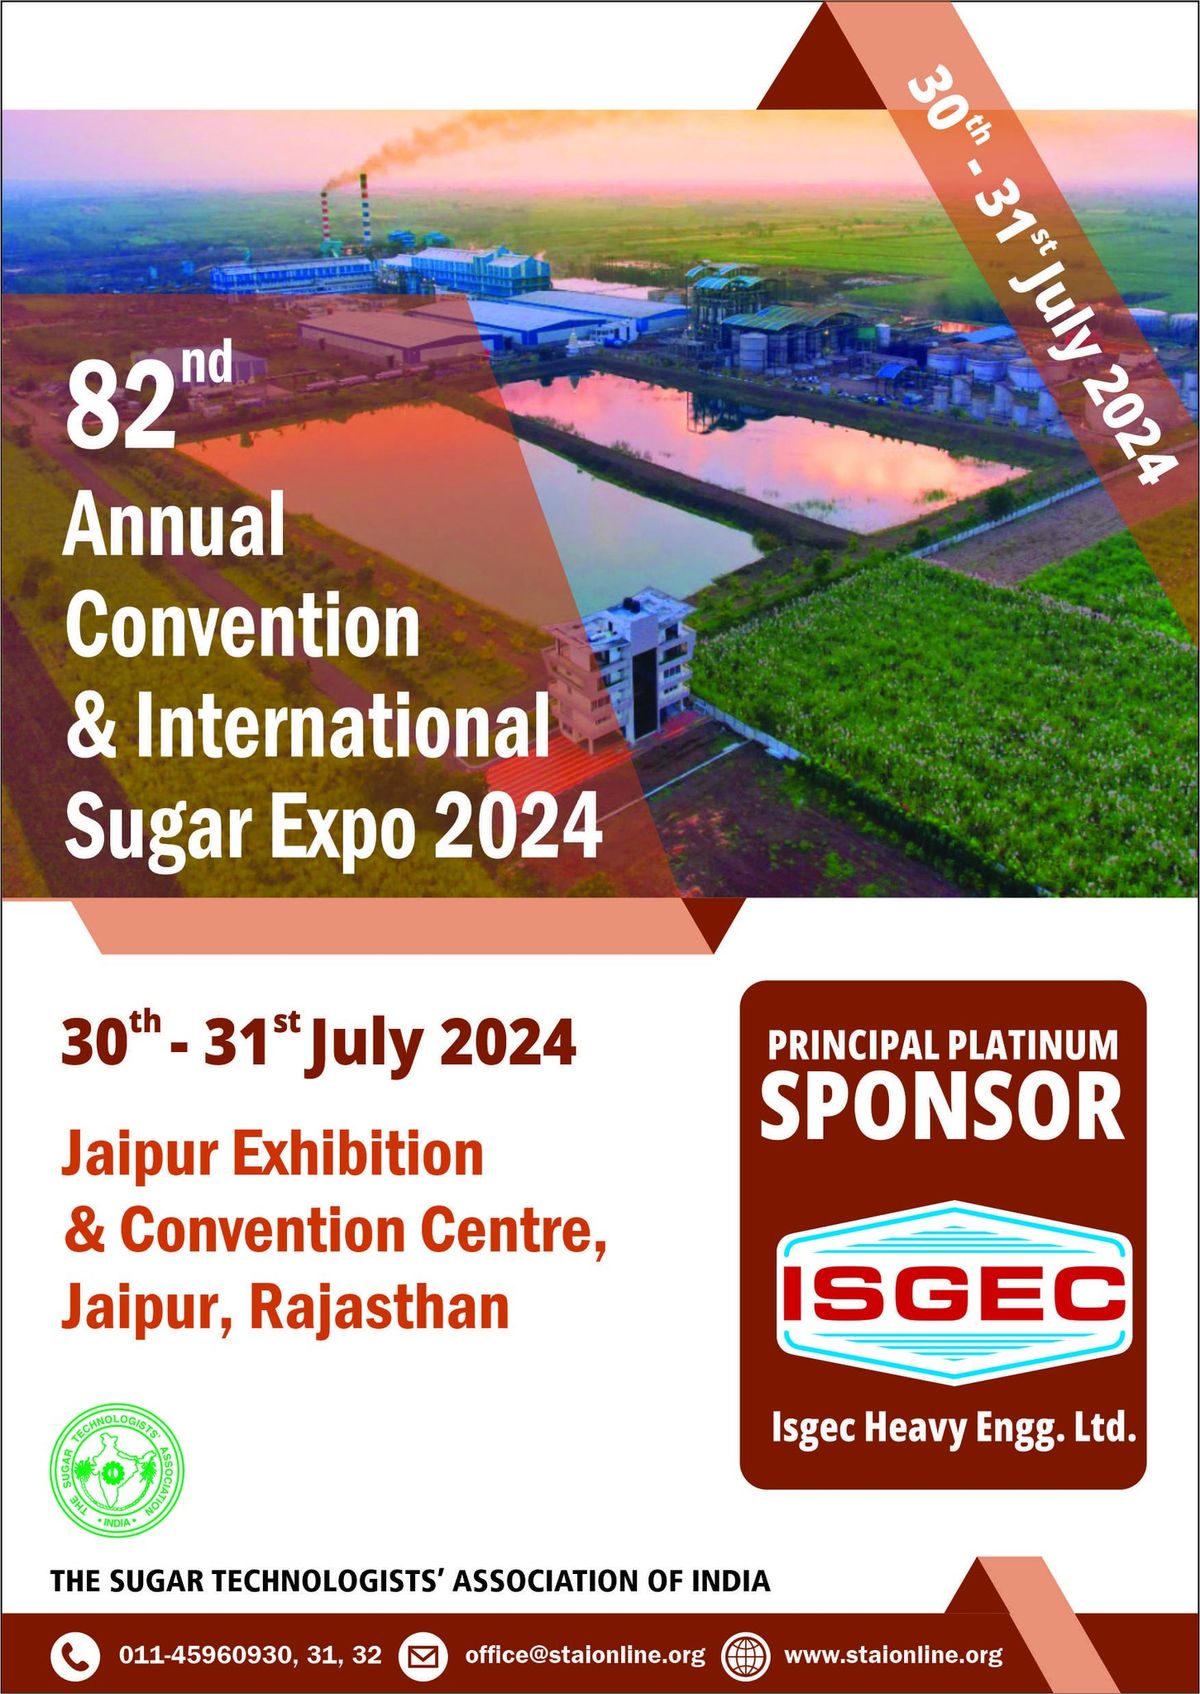 STAI's - 82nd Annual Convention & International Sugar Expo 2024